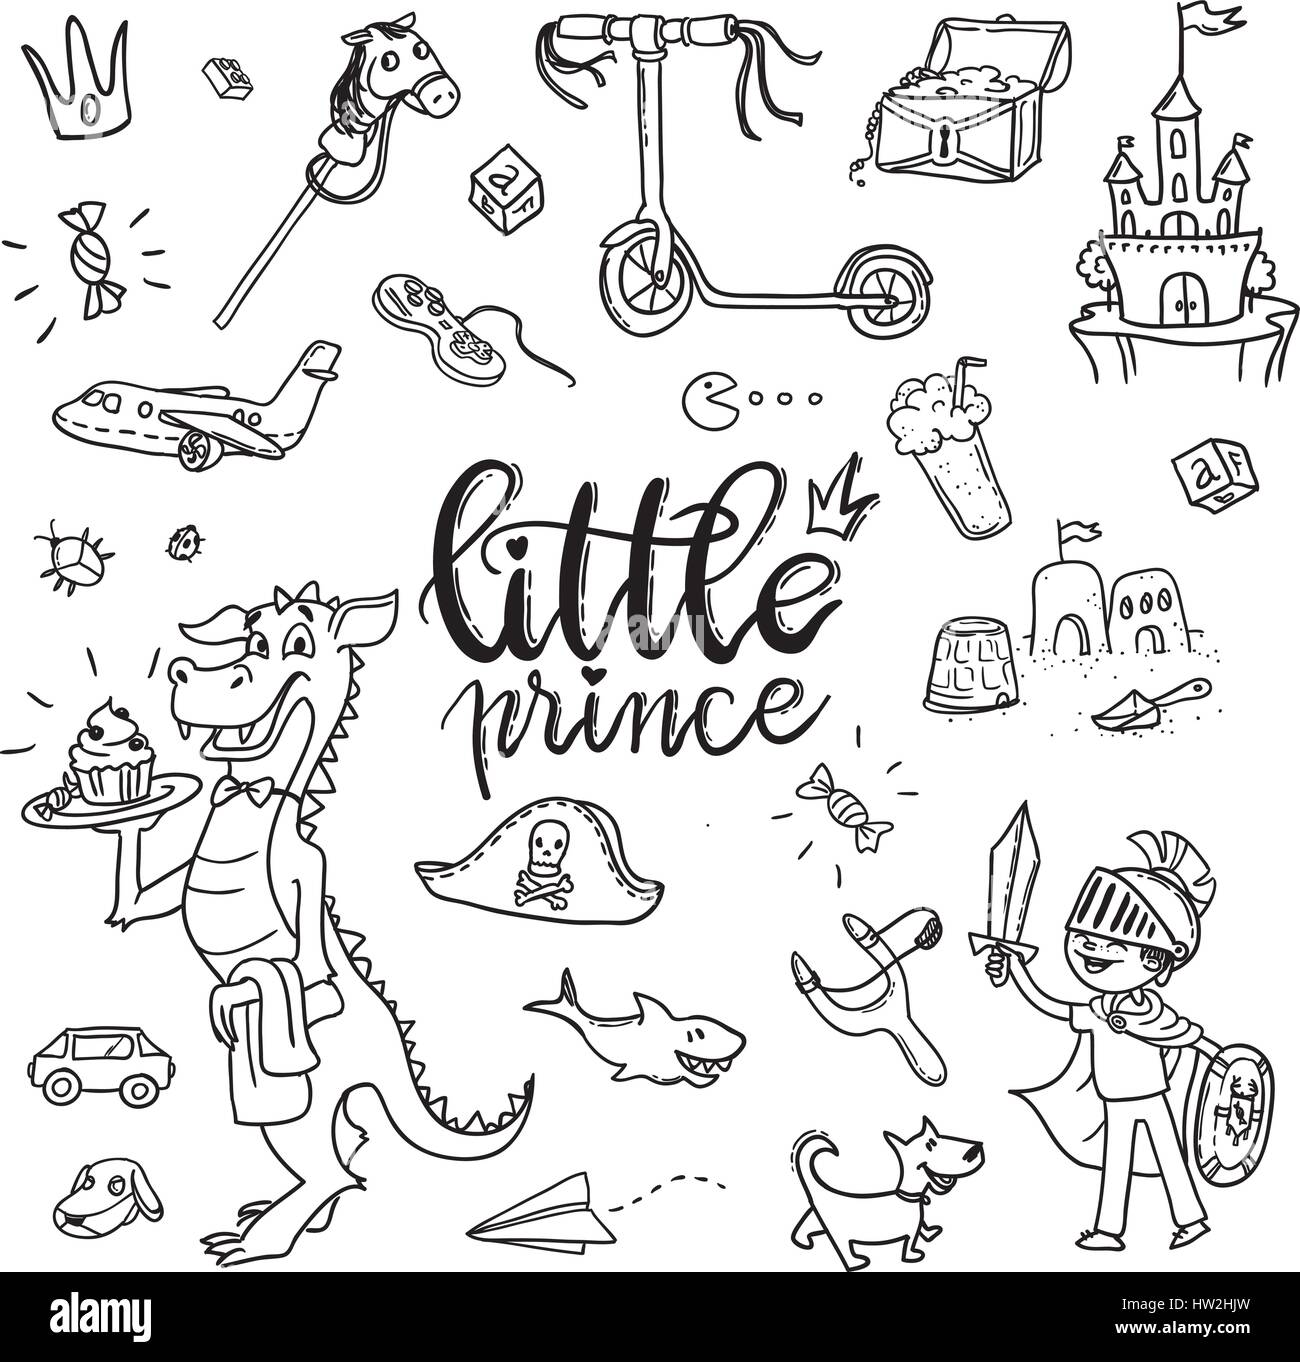 Little prince funny graphic set. Boy in armor and cloak, sword, dragon, scooter, the pirate chest, castle, dog, boys treasures, Isolated elements on a Stock Vector